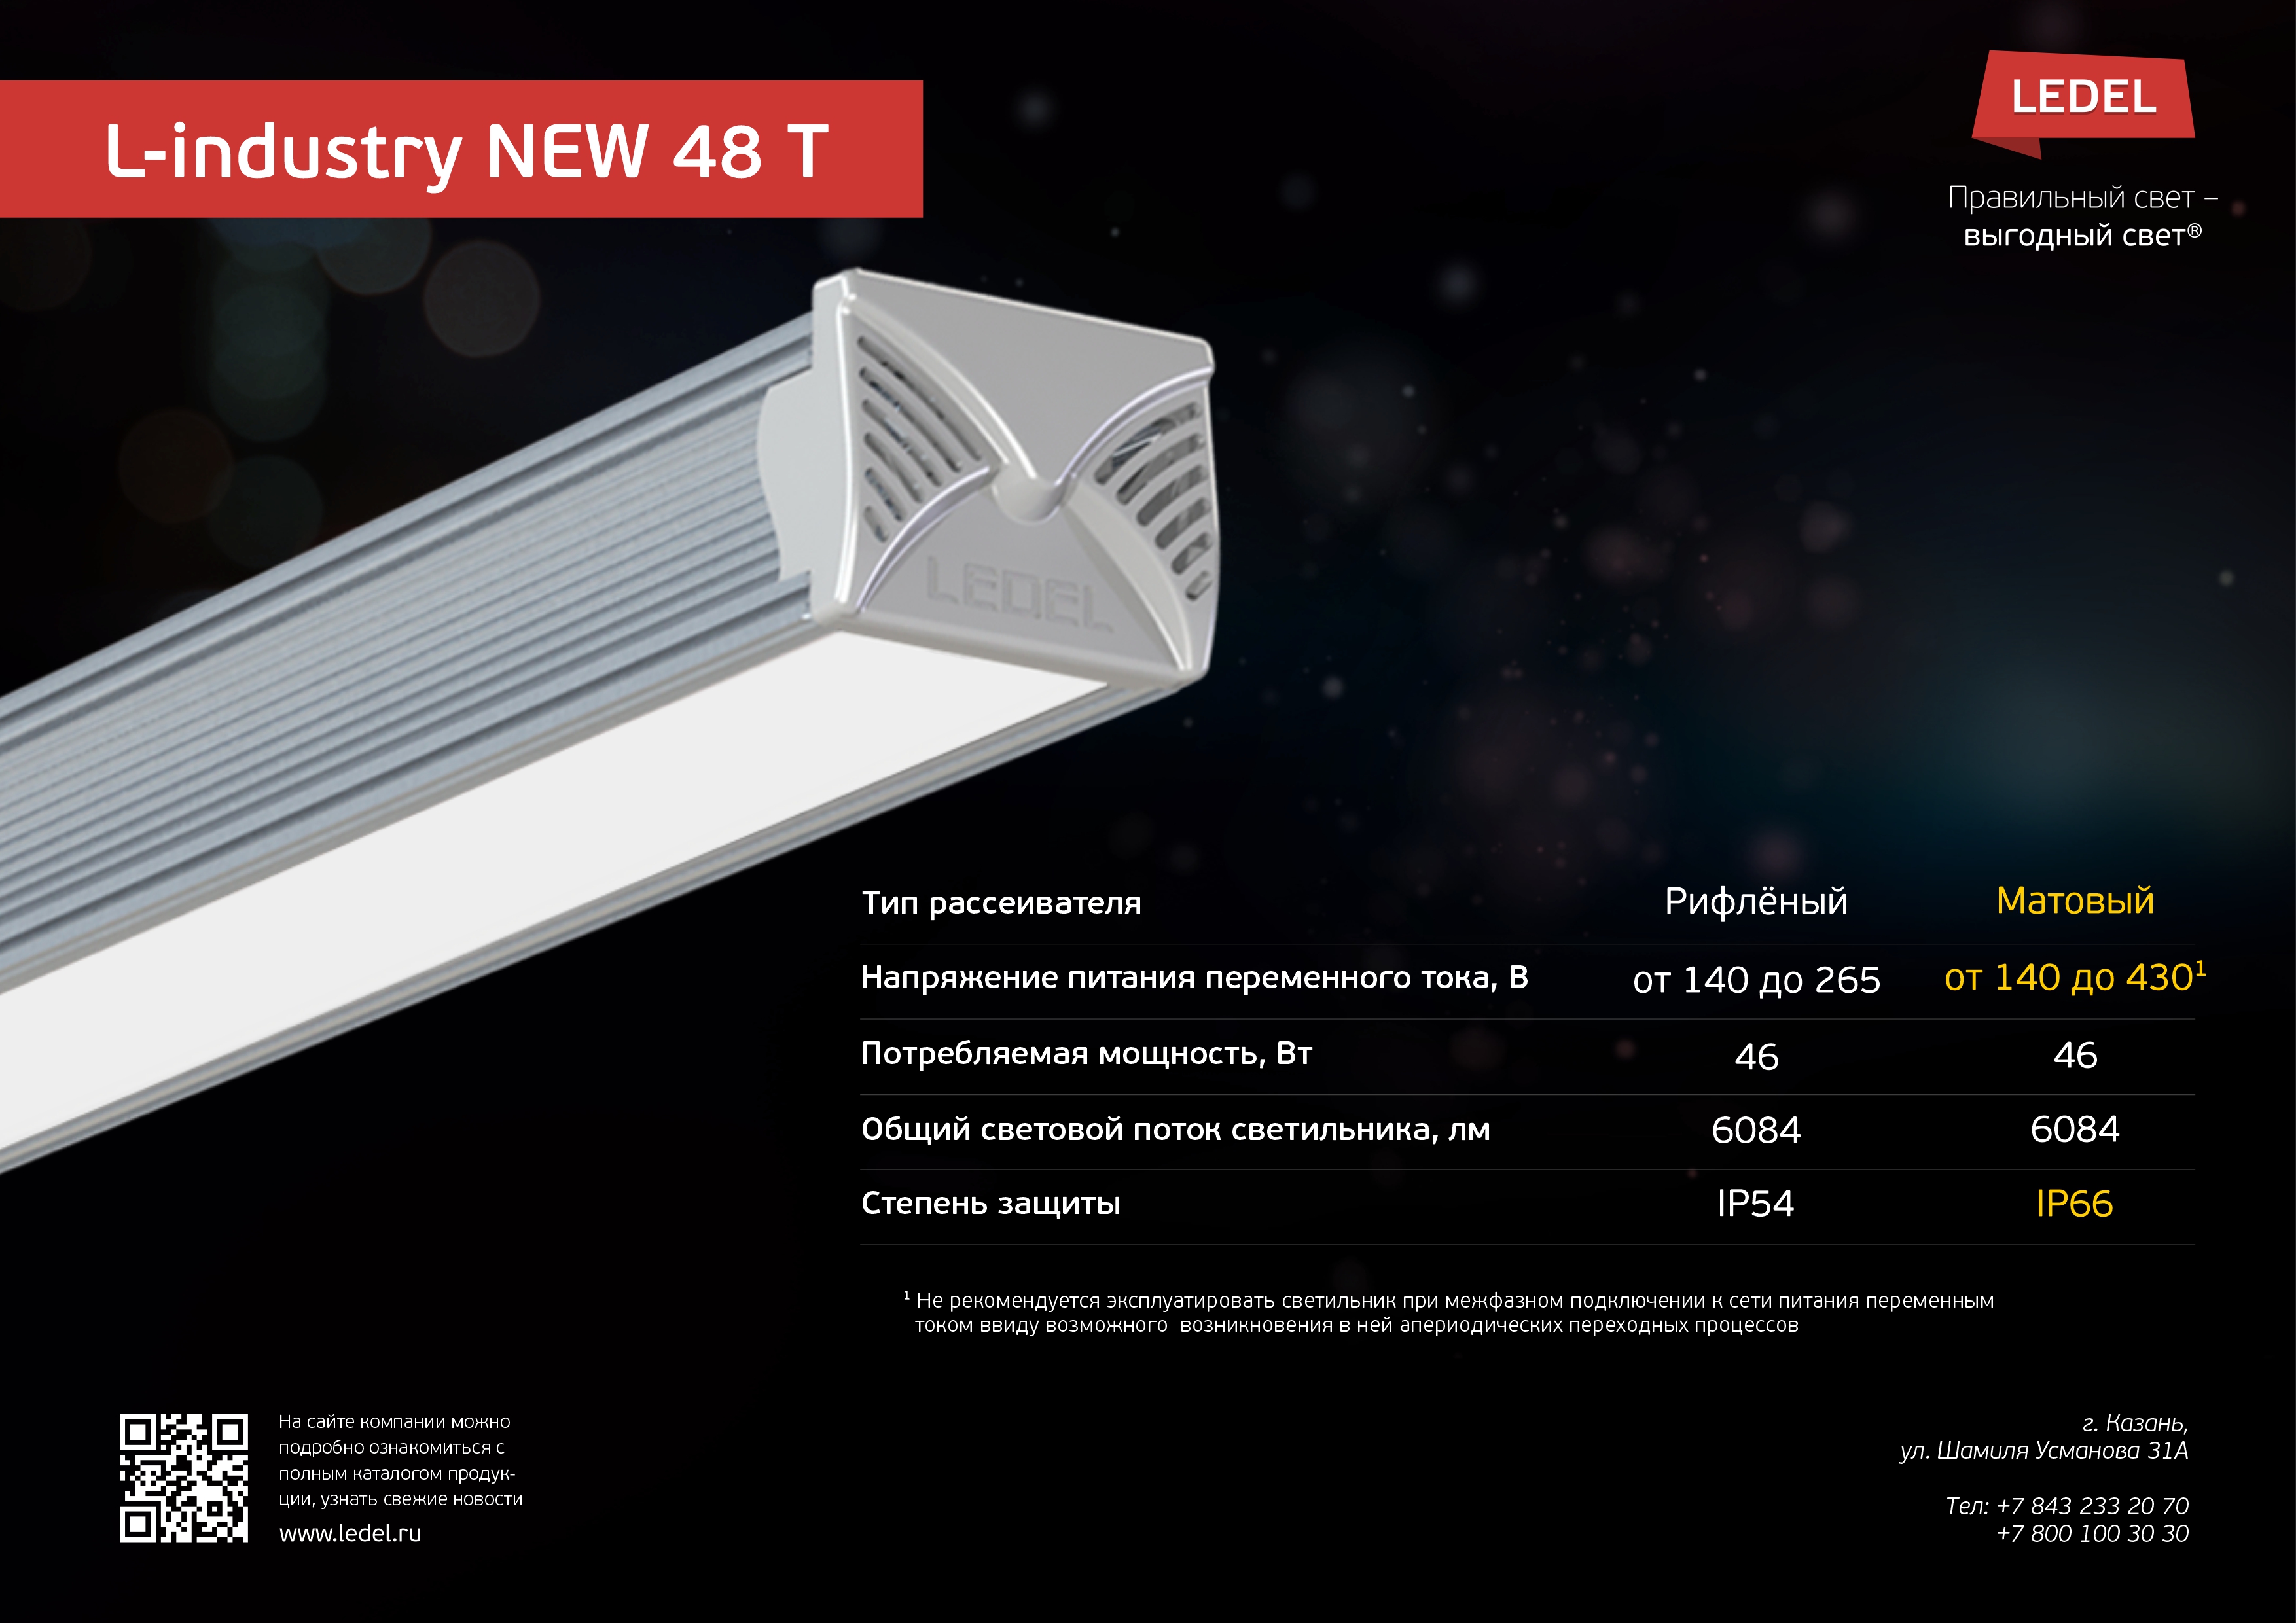 L-industry New 48